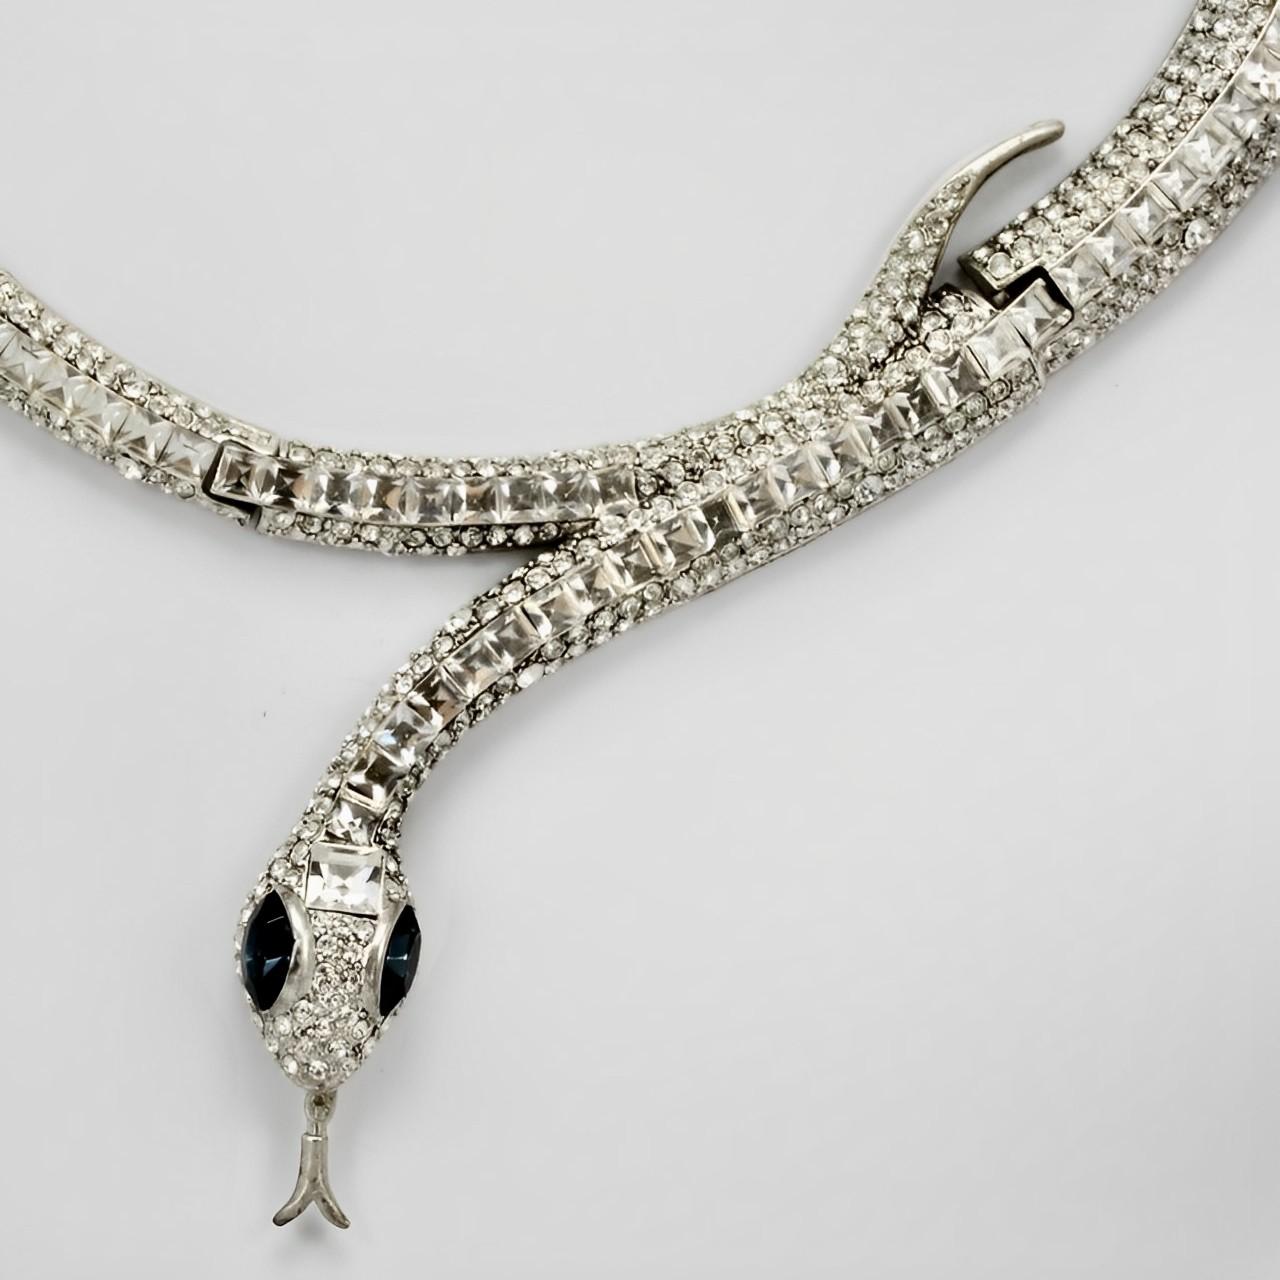 Wonderful silver tone snake collar with black enamel detail, and set with square and round clear rhinestones at the front. The snake has mid blue rhinestone eyes, and a trembler tongue which is held on a spring. The necklace is curved to sit around